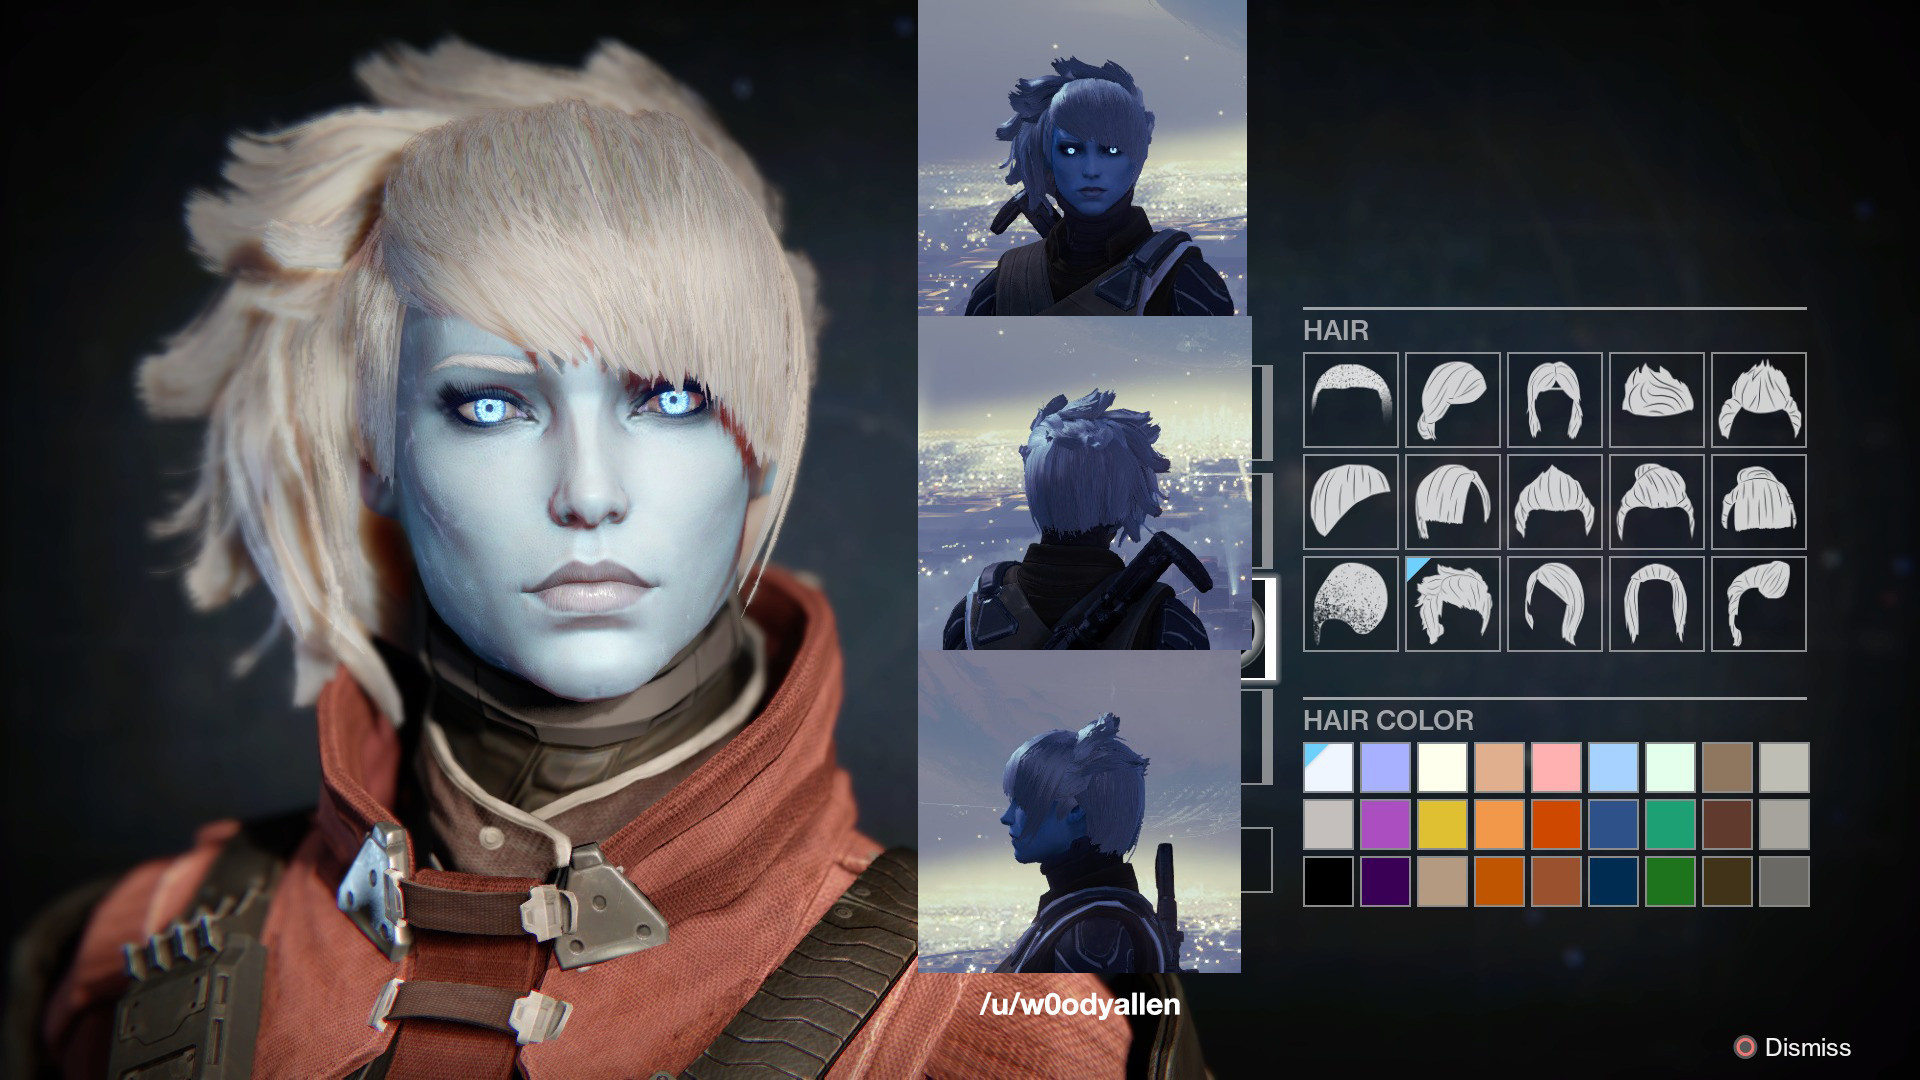 Destiny 2 Female Hairstyles
 Destiny Awoken Female Hairstyles what your hair looks